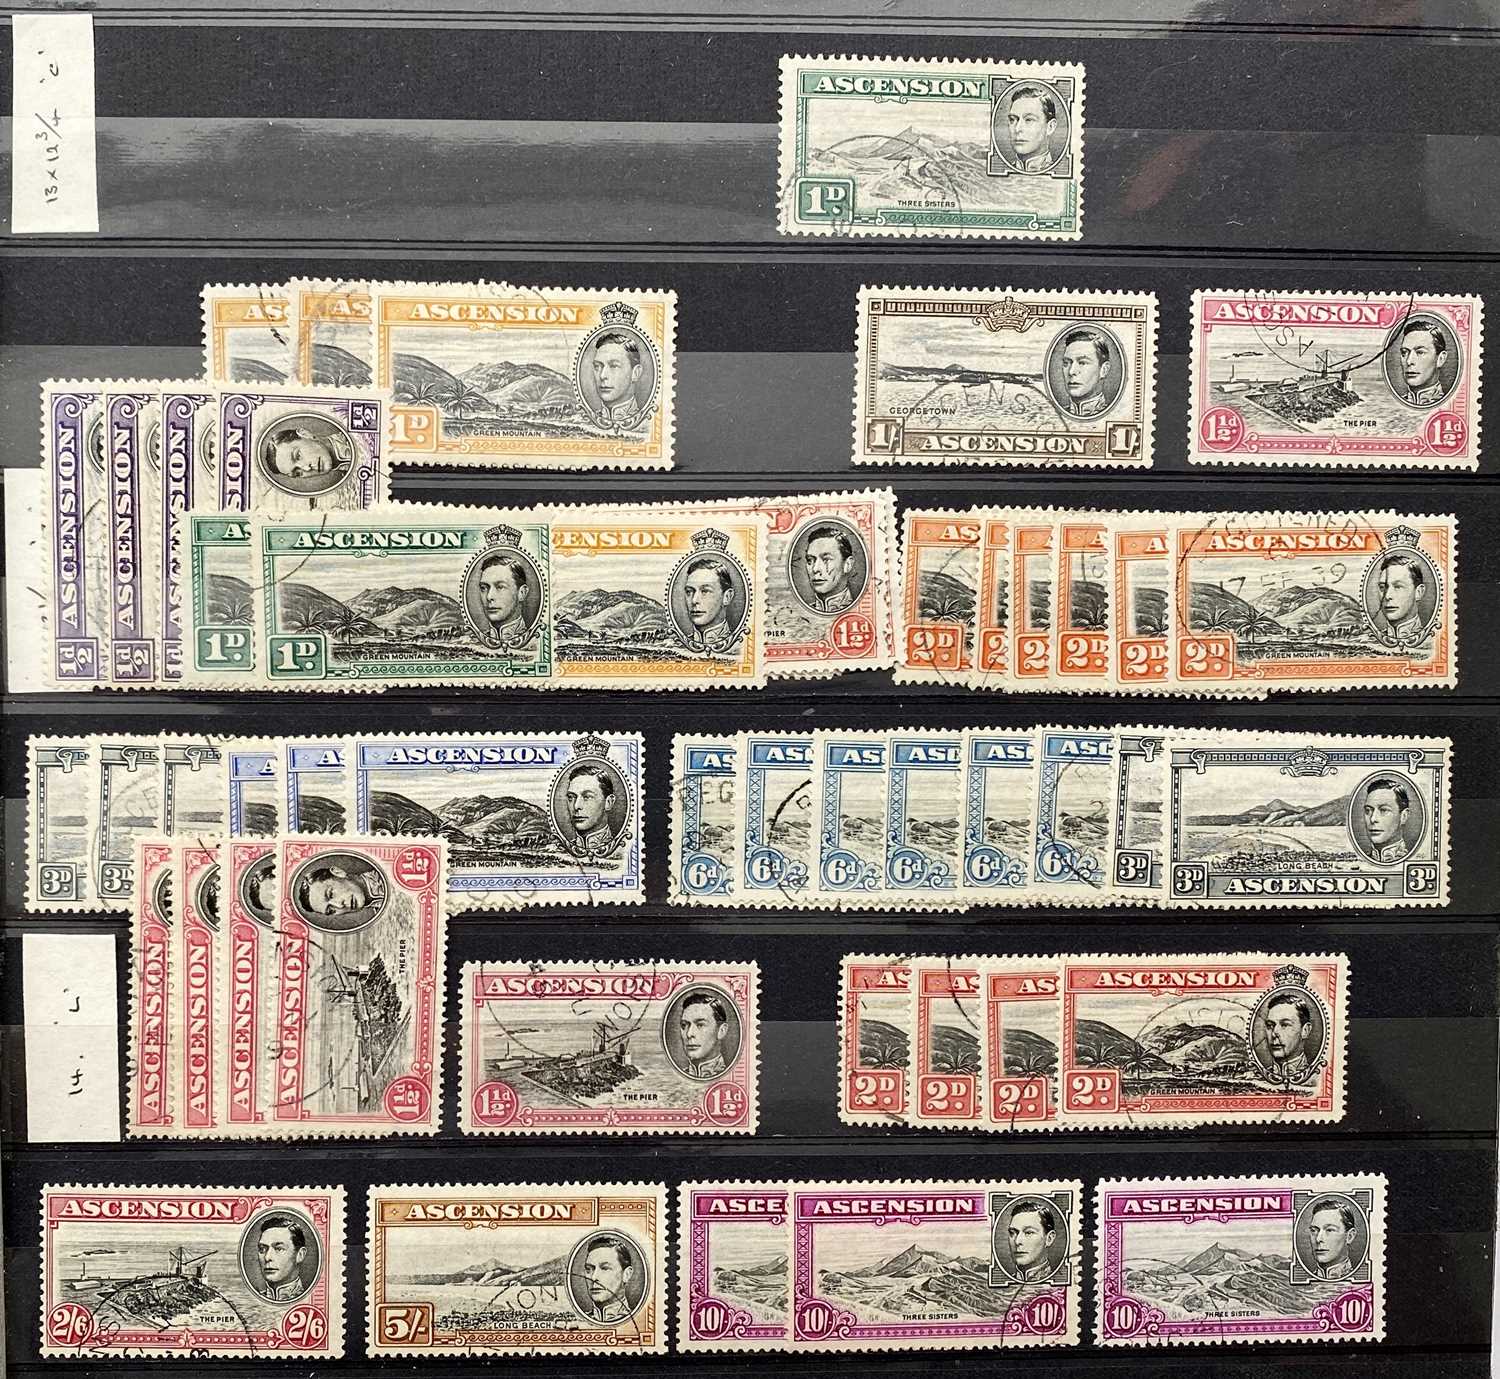 COMMONWEALTH GV1 - fine used collection of many countries, full sets and top values, good quality - Image 15 of 17